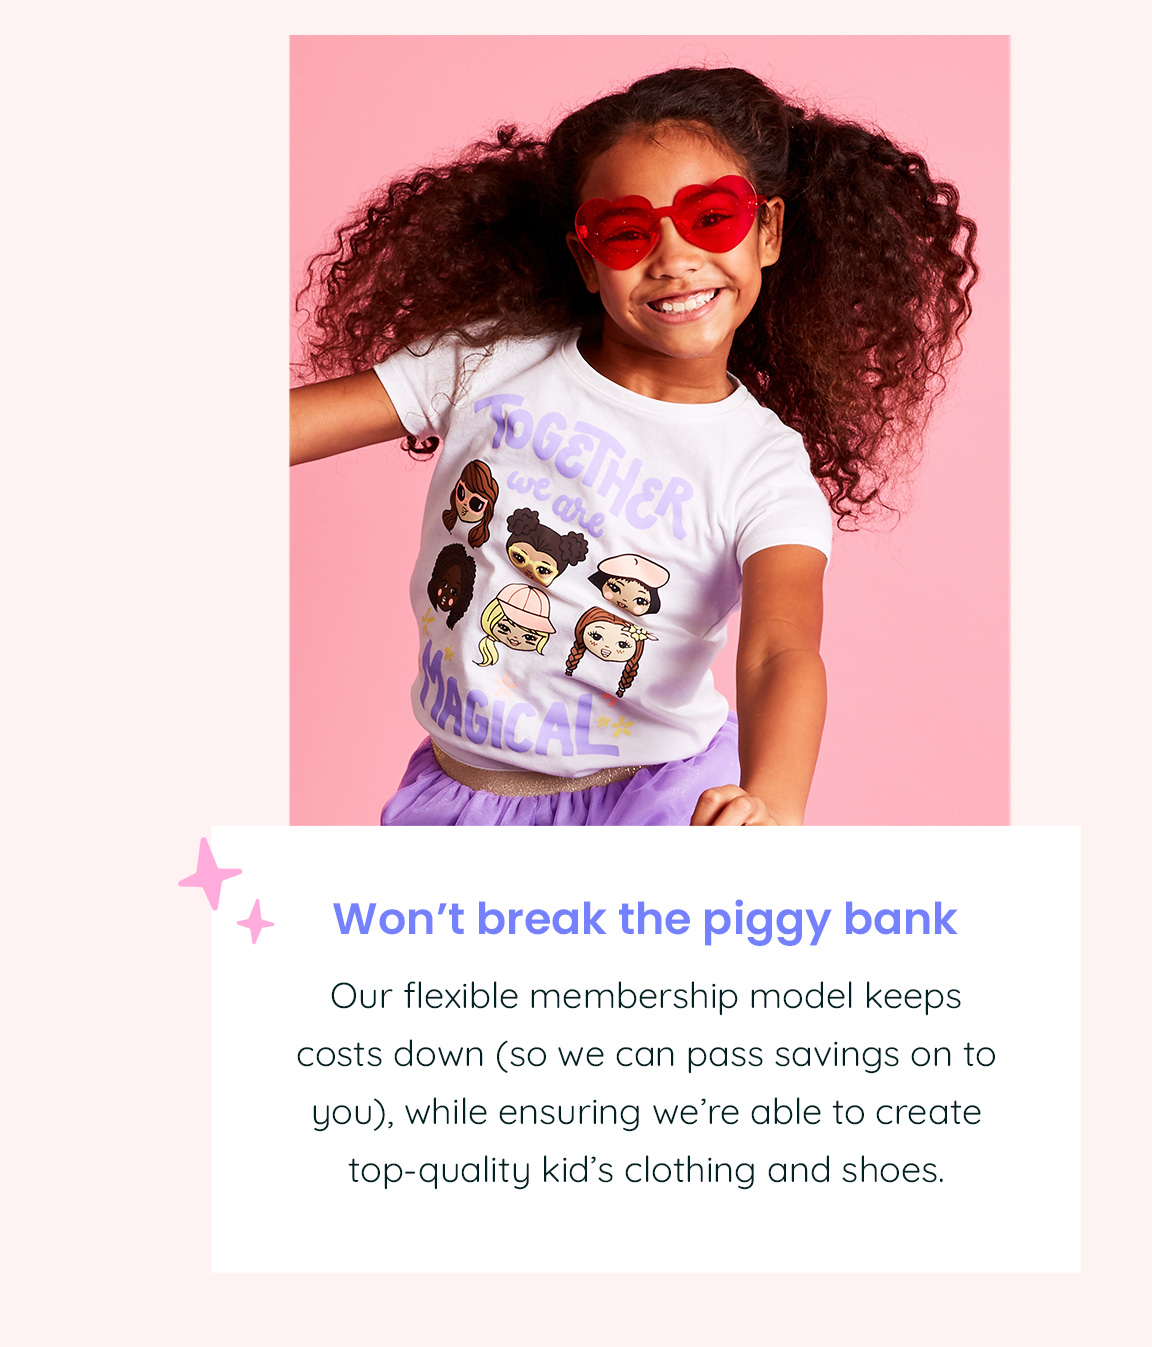 Won't break the piggy bank - Our flexible membership model keeps costs down (so we can pass savings on to you), while ensuring we're able to create top-quality kid's clothing and shoes.